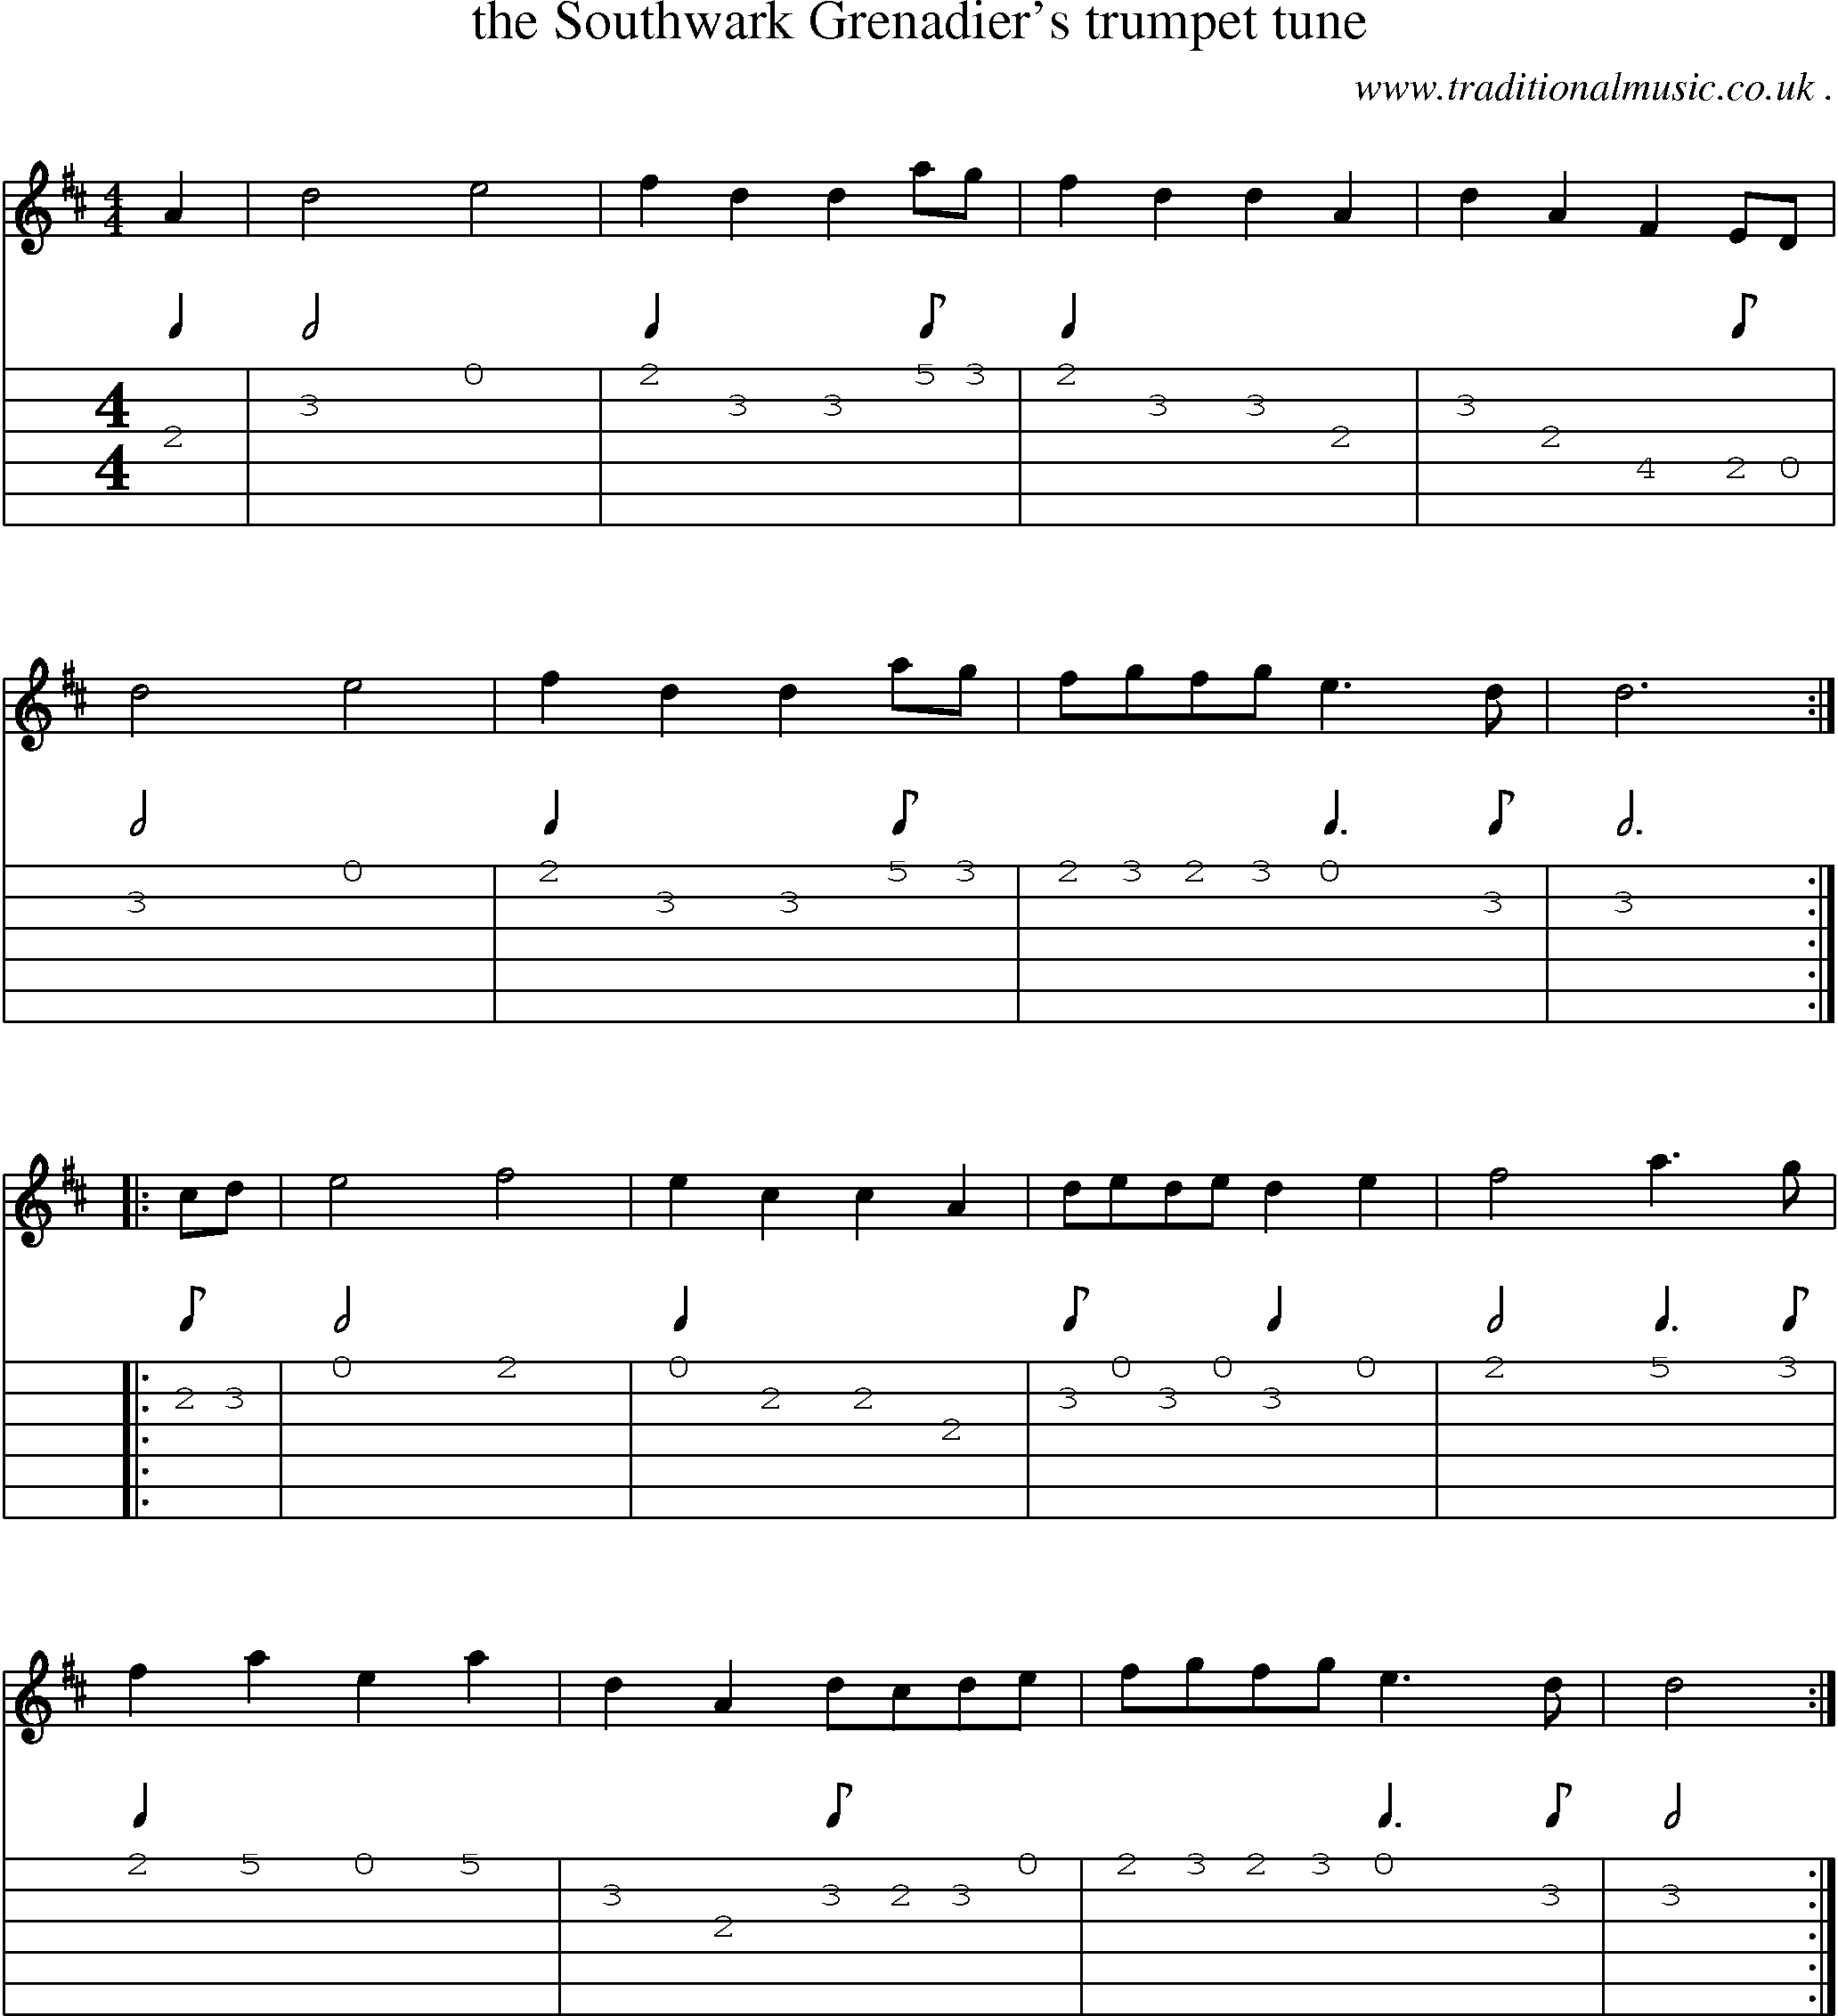 Sheet-Music and Guitar Tabs for The Southwark Grenadier Trumpet Tune